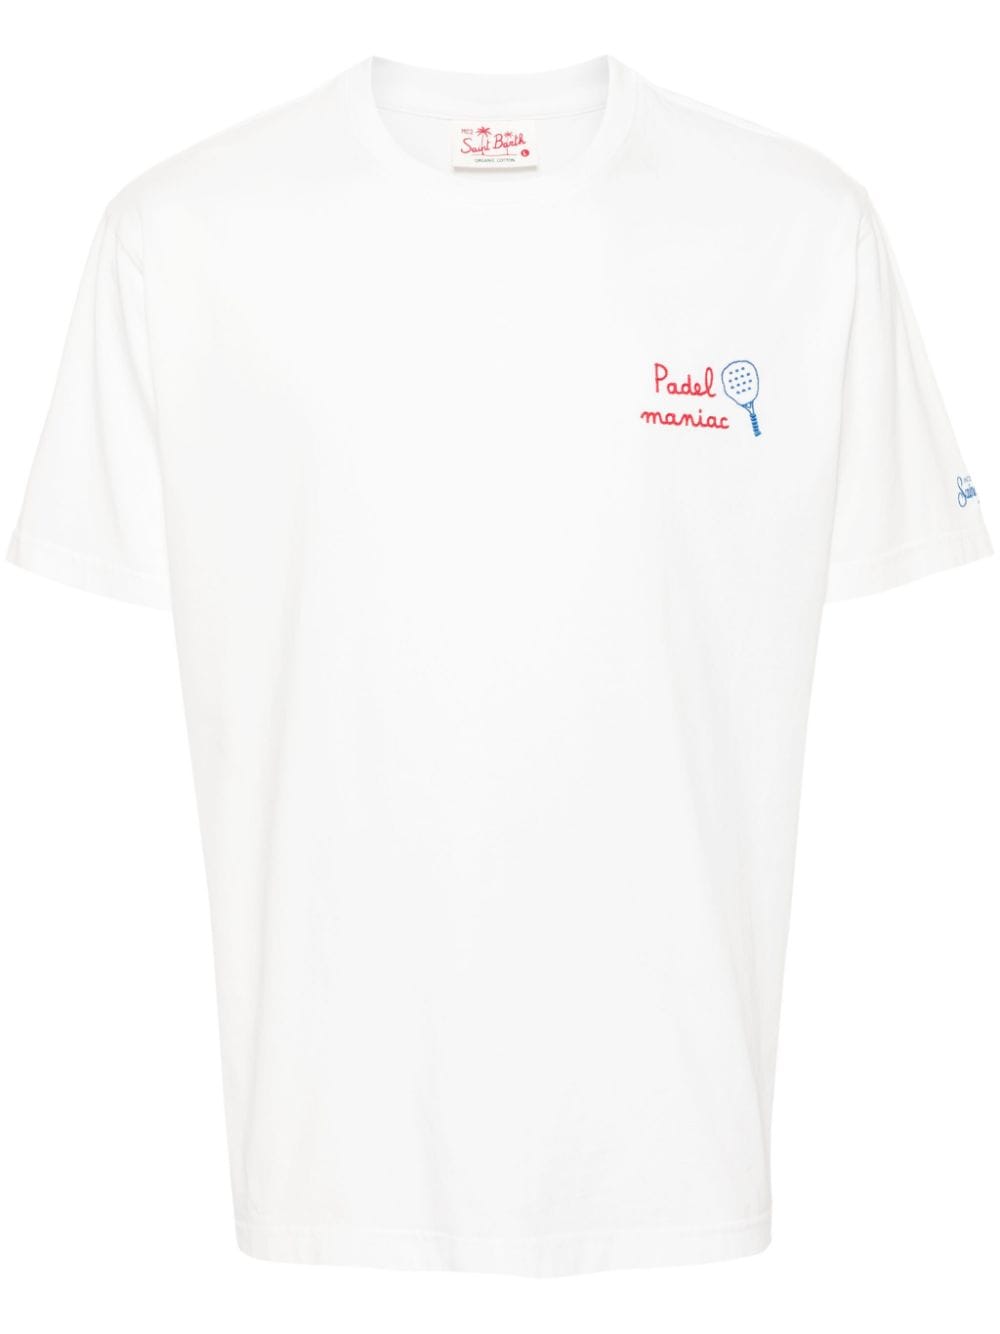 Padel maniac-embroidered T-shirt